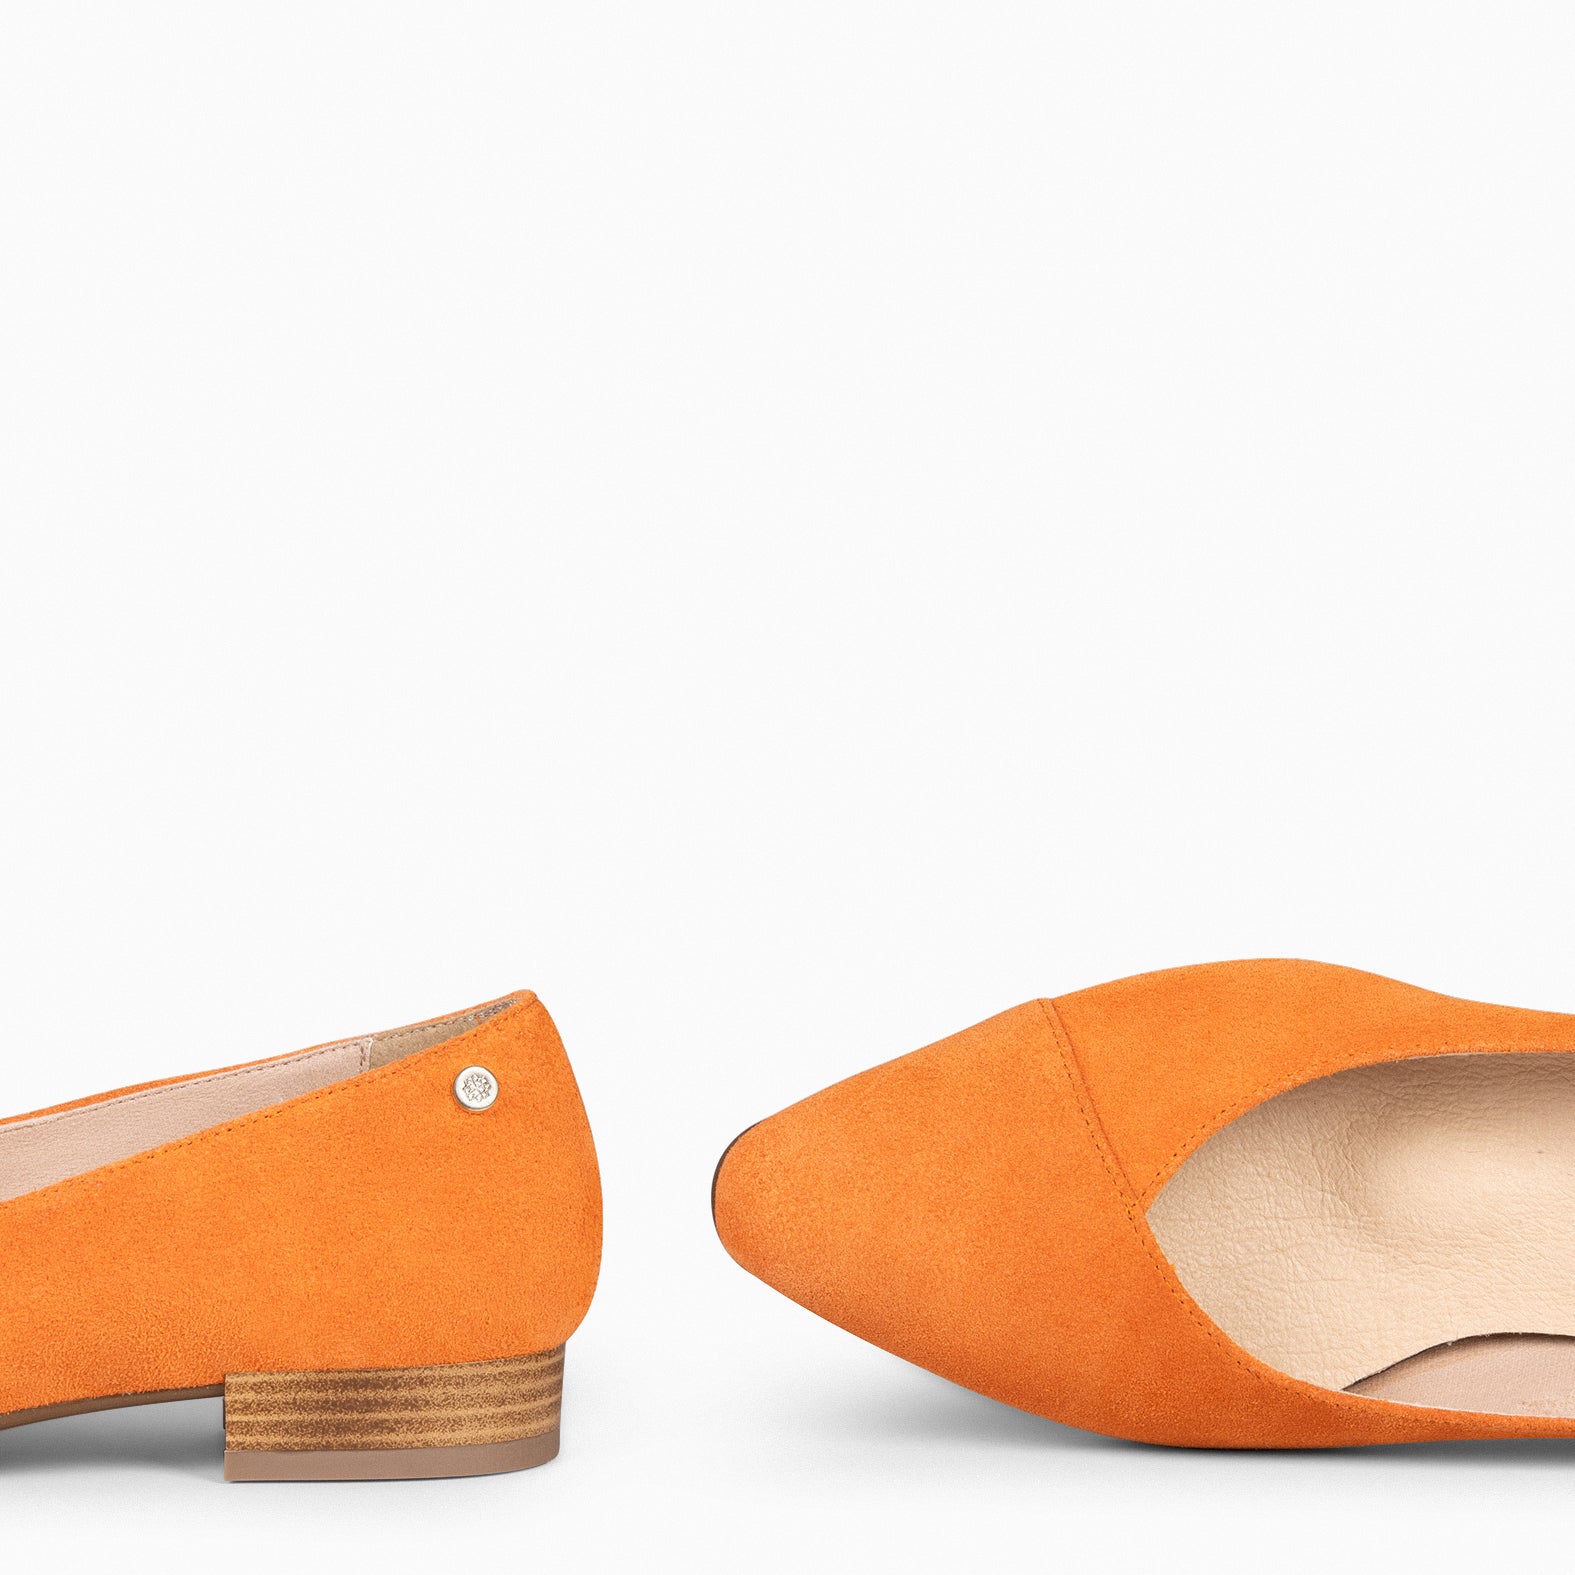 MARIE – ORANGE pointed flats